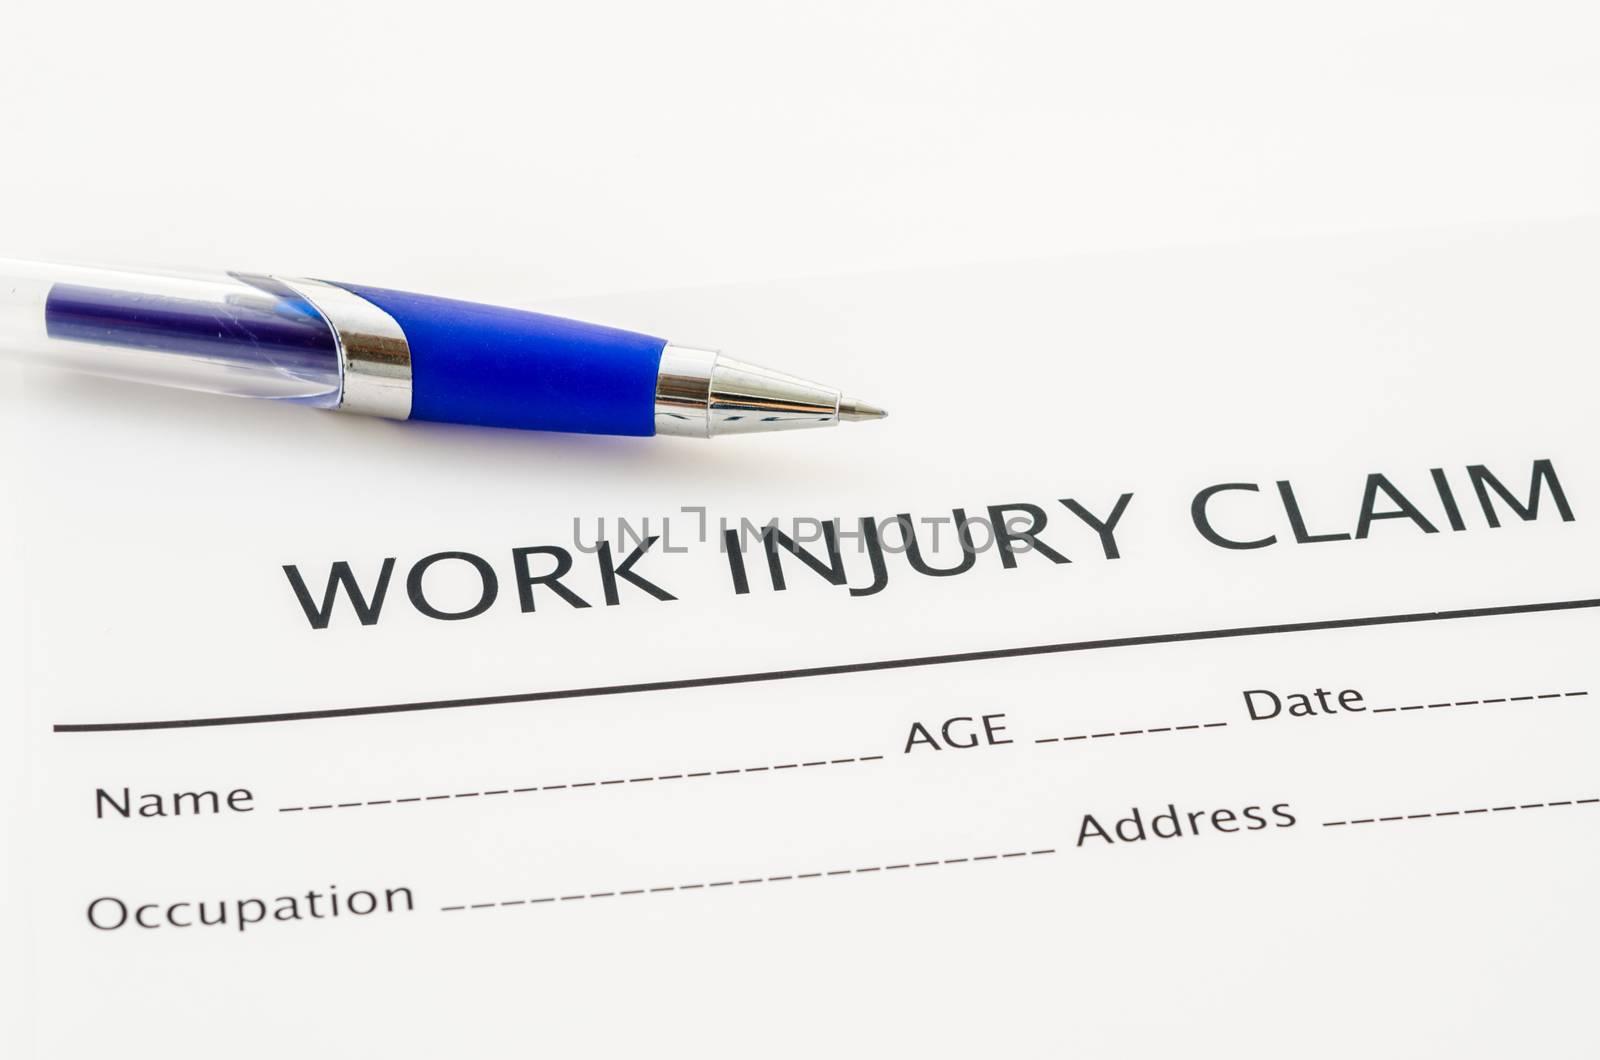 Claim form for an injury at work with pen. by Gamjai